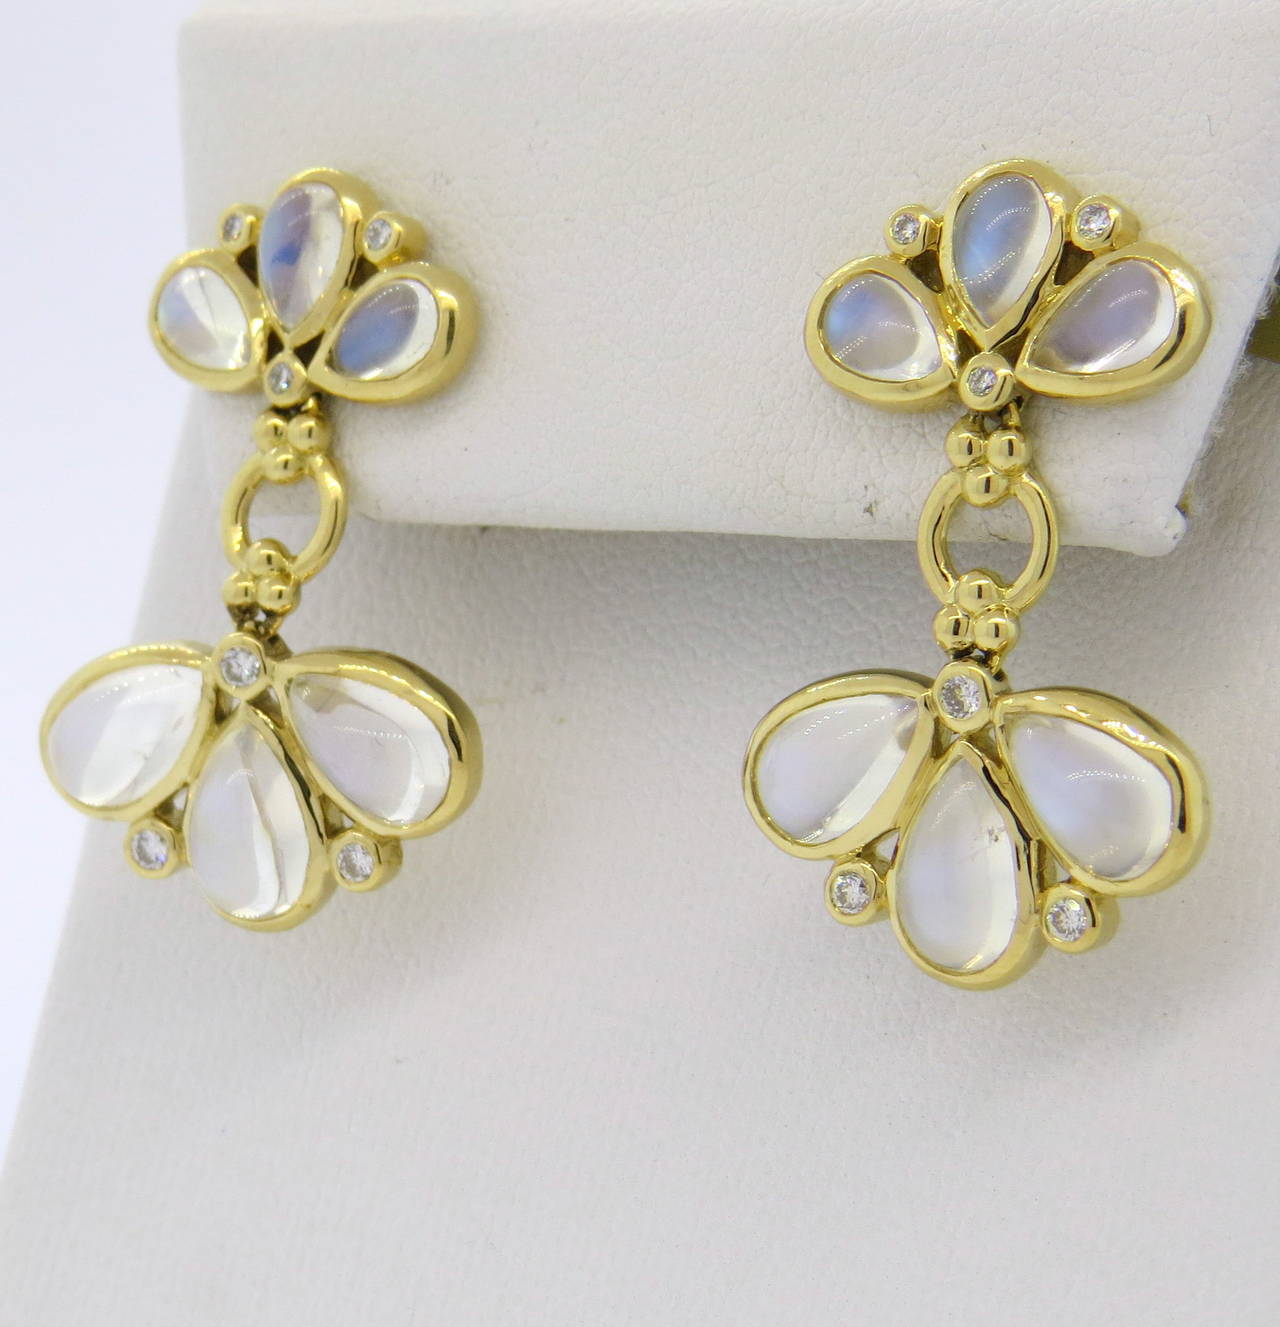 18k gold earrings by Temple St. Clair, set with approx. 0.21ctw in G/VS diamonds and moonstone cabochons, featuring fan drop design. Earrings measure 30mm x 20mm wide at widest point. Marked with Temple hallmark. Weight - 9.9 grams

Retail for